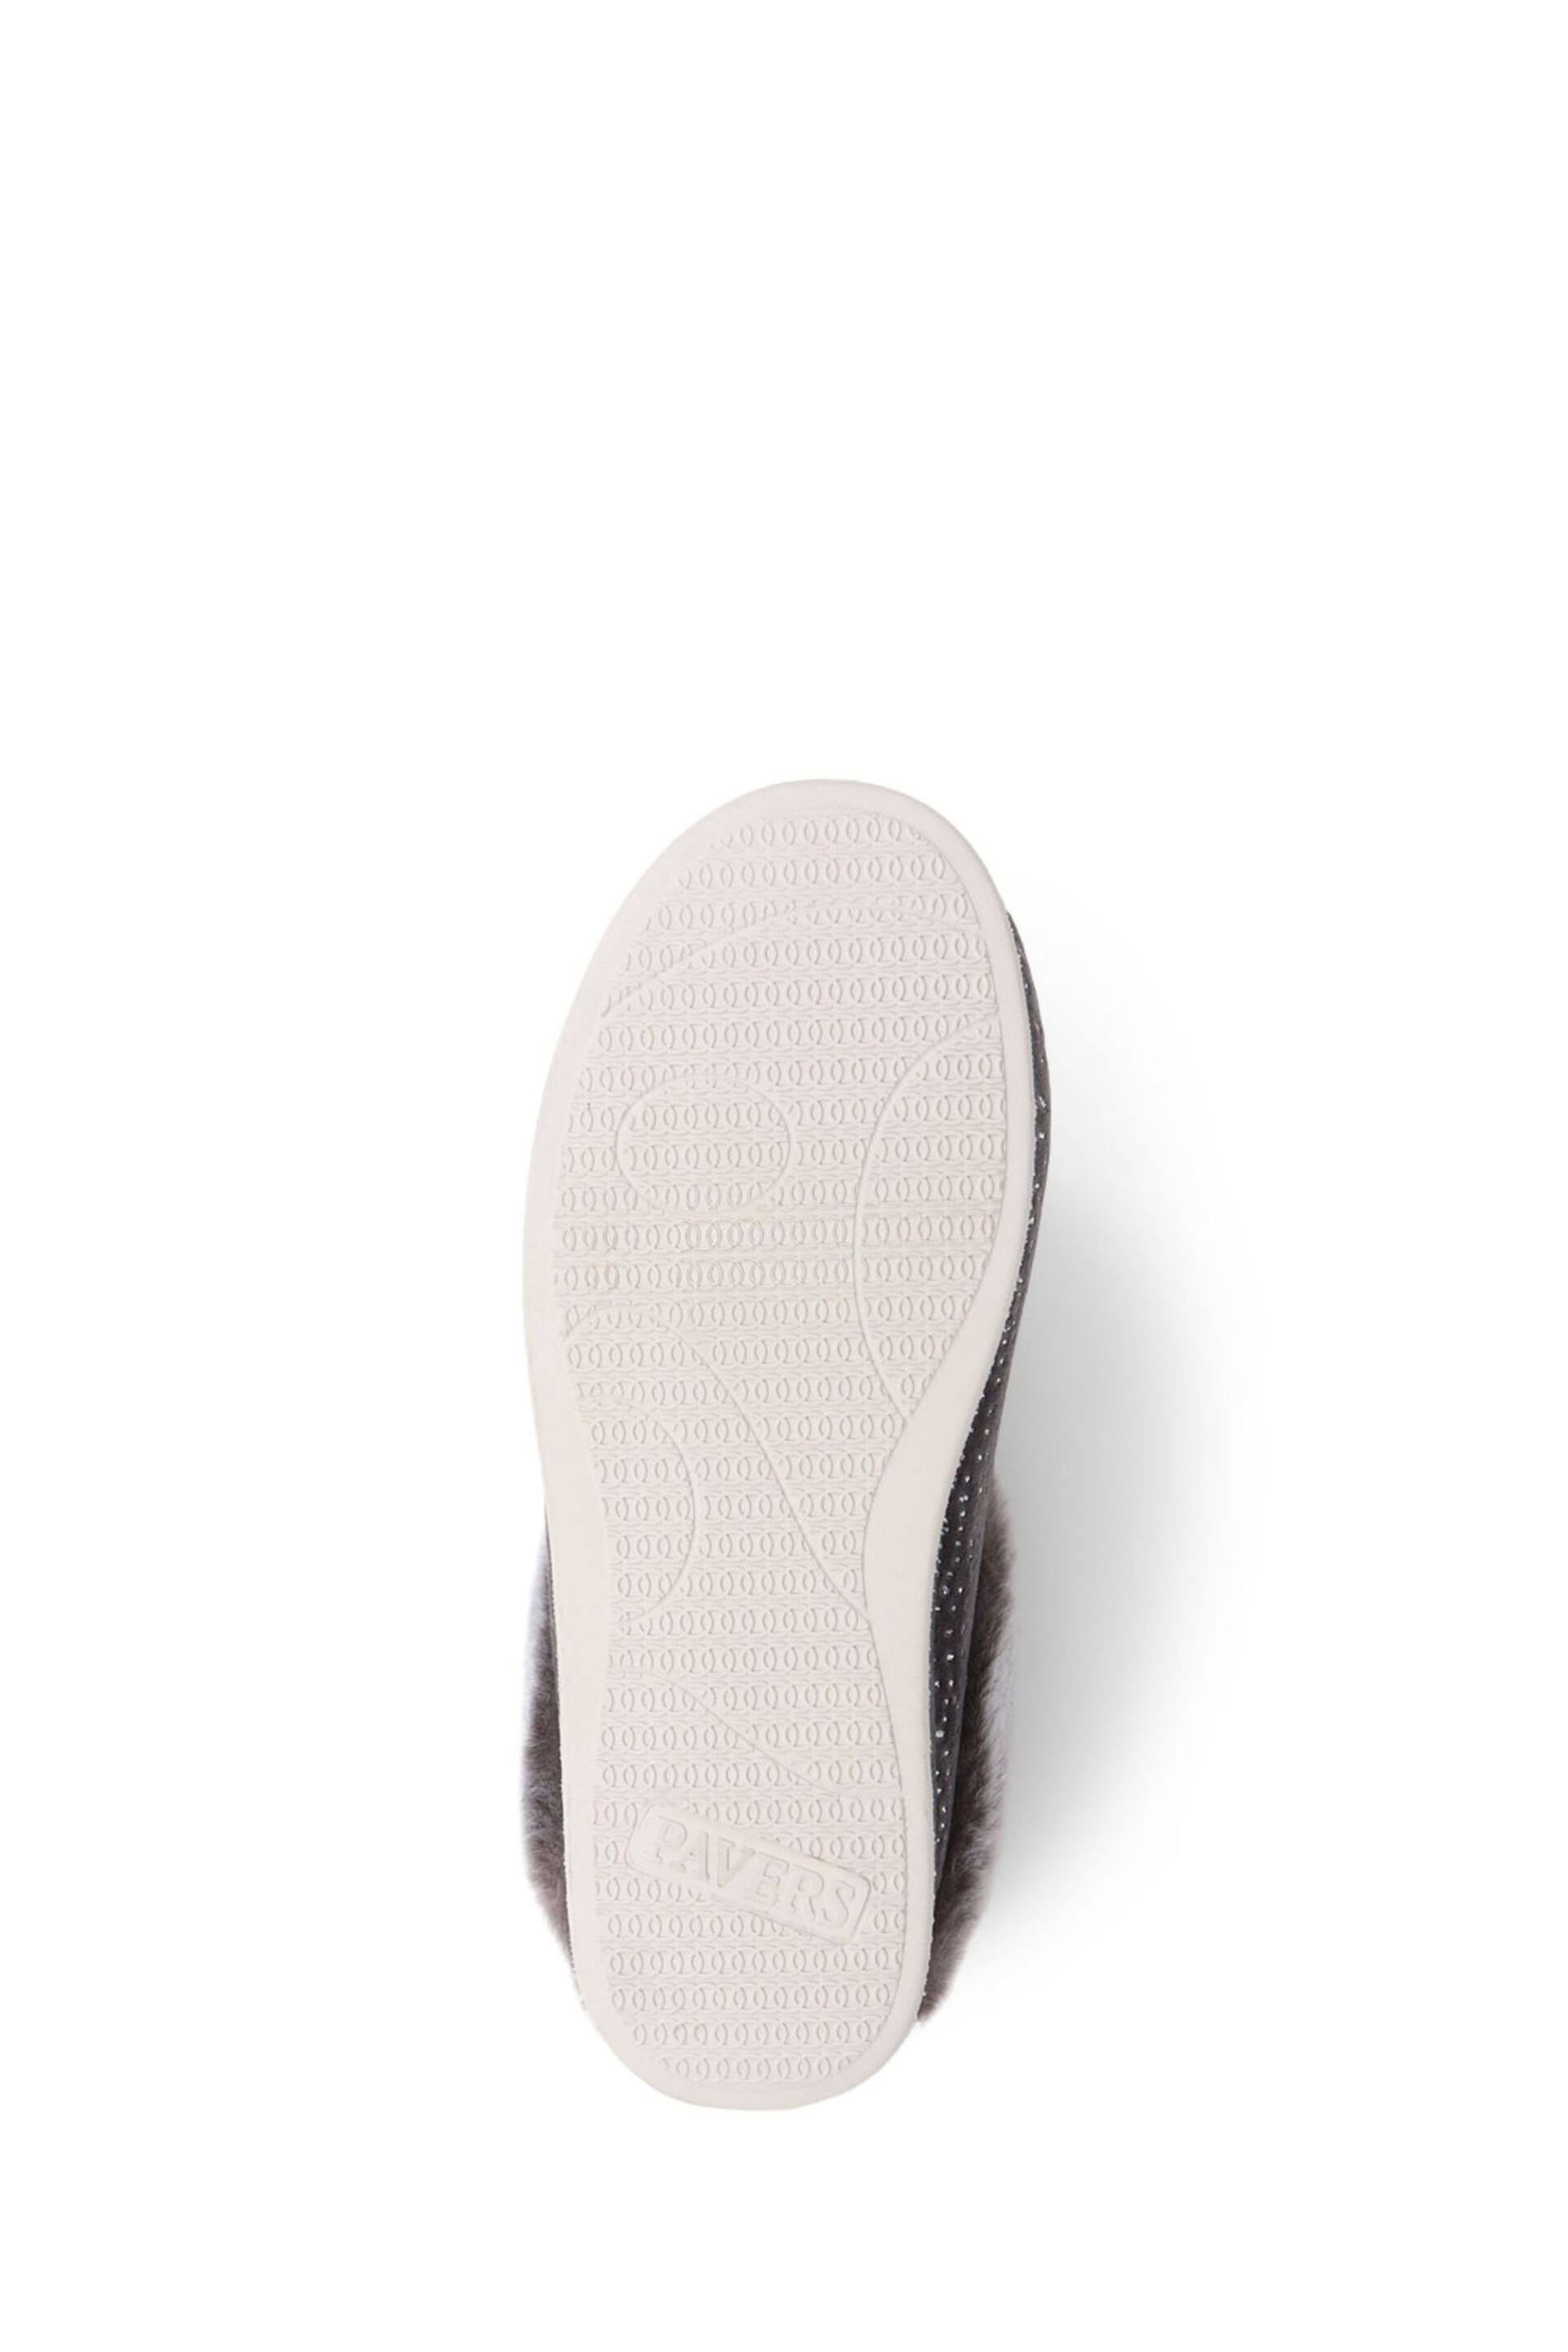 Pavers Grey Patterned Full Slippers - Image 5 of 5